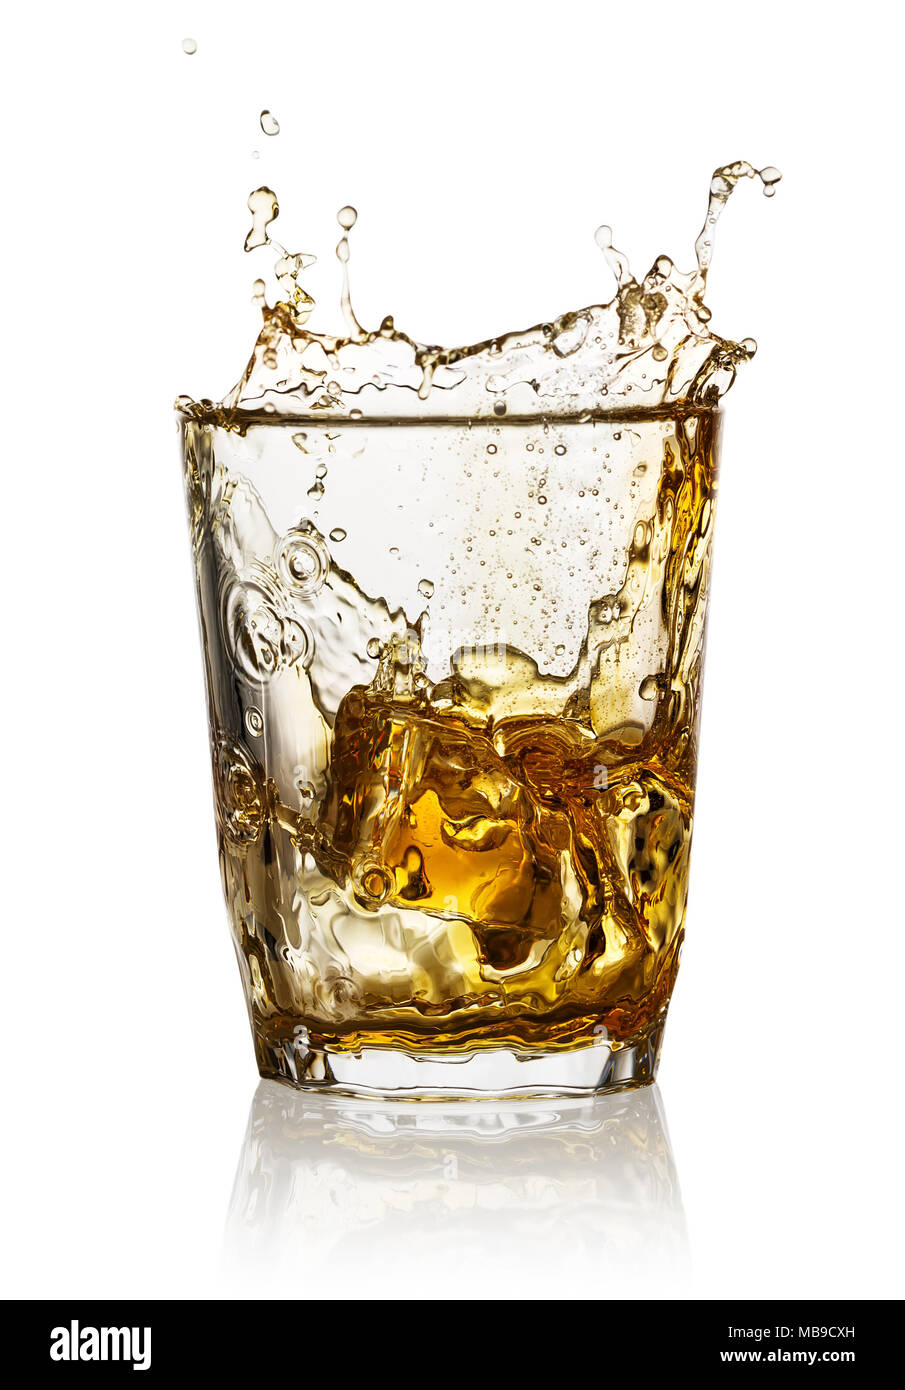 https://c8.alamy.com/comp/MB9CXH/splash-in-a-transparent-glass-of-whiskey-isolated-on-white-background-MB9CXH.jpg